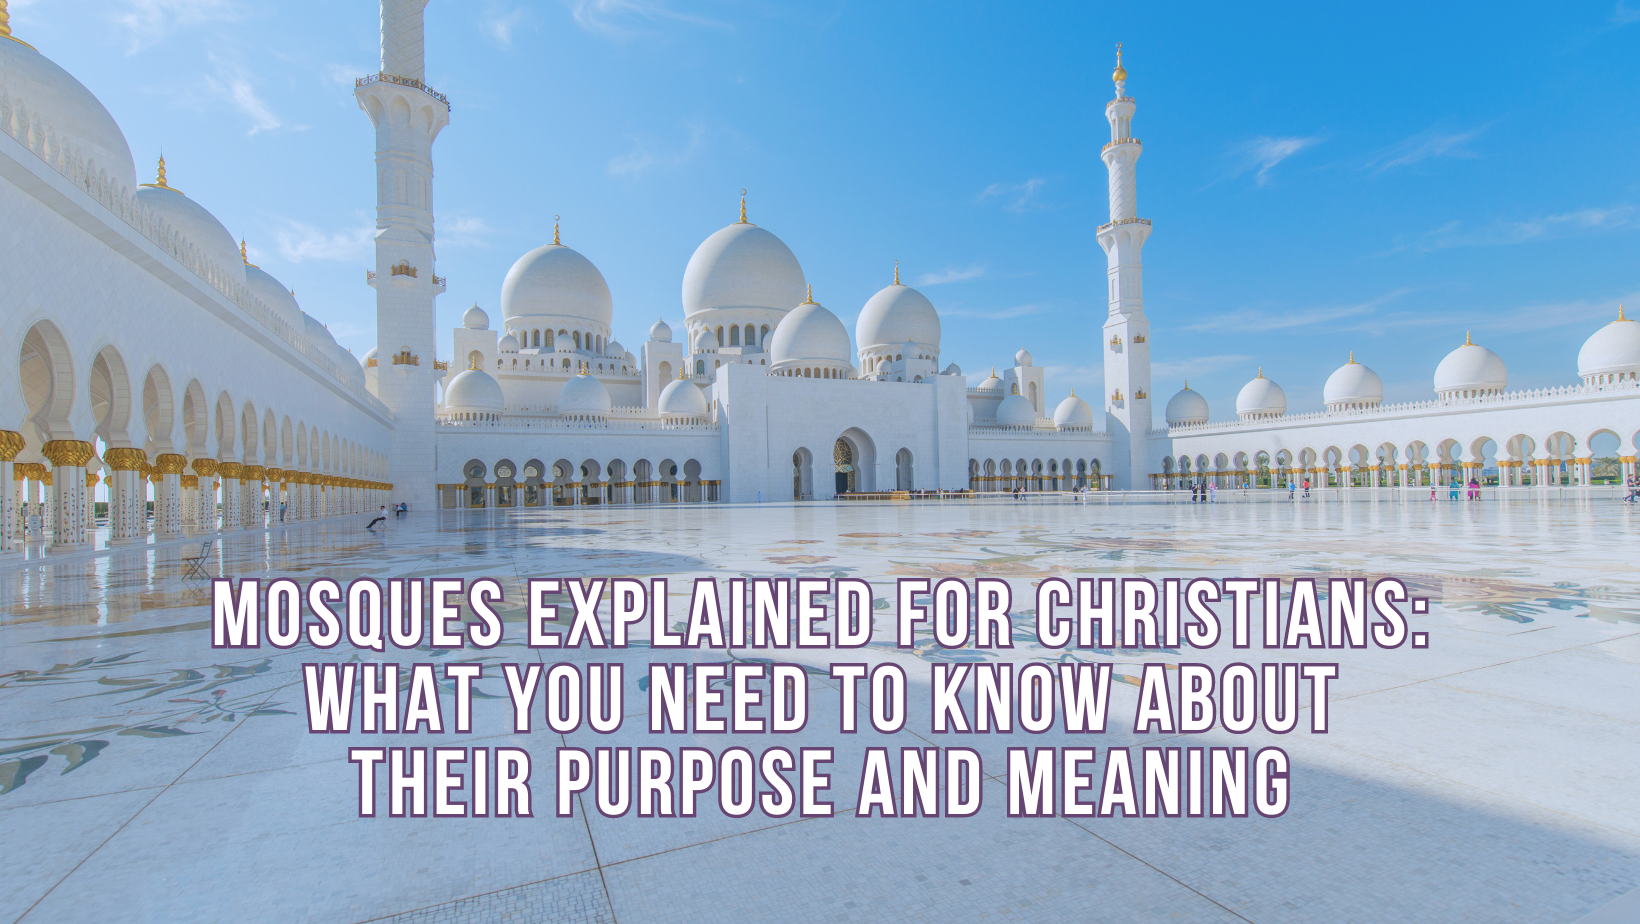 Mosques explained for Christians: What you need to know about their purpose and meaning